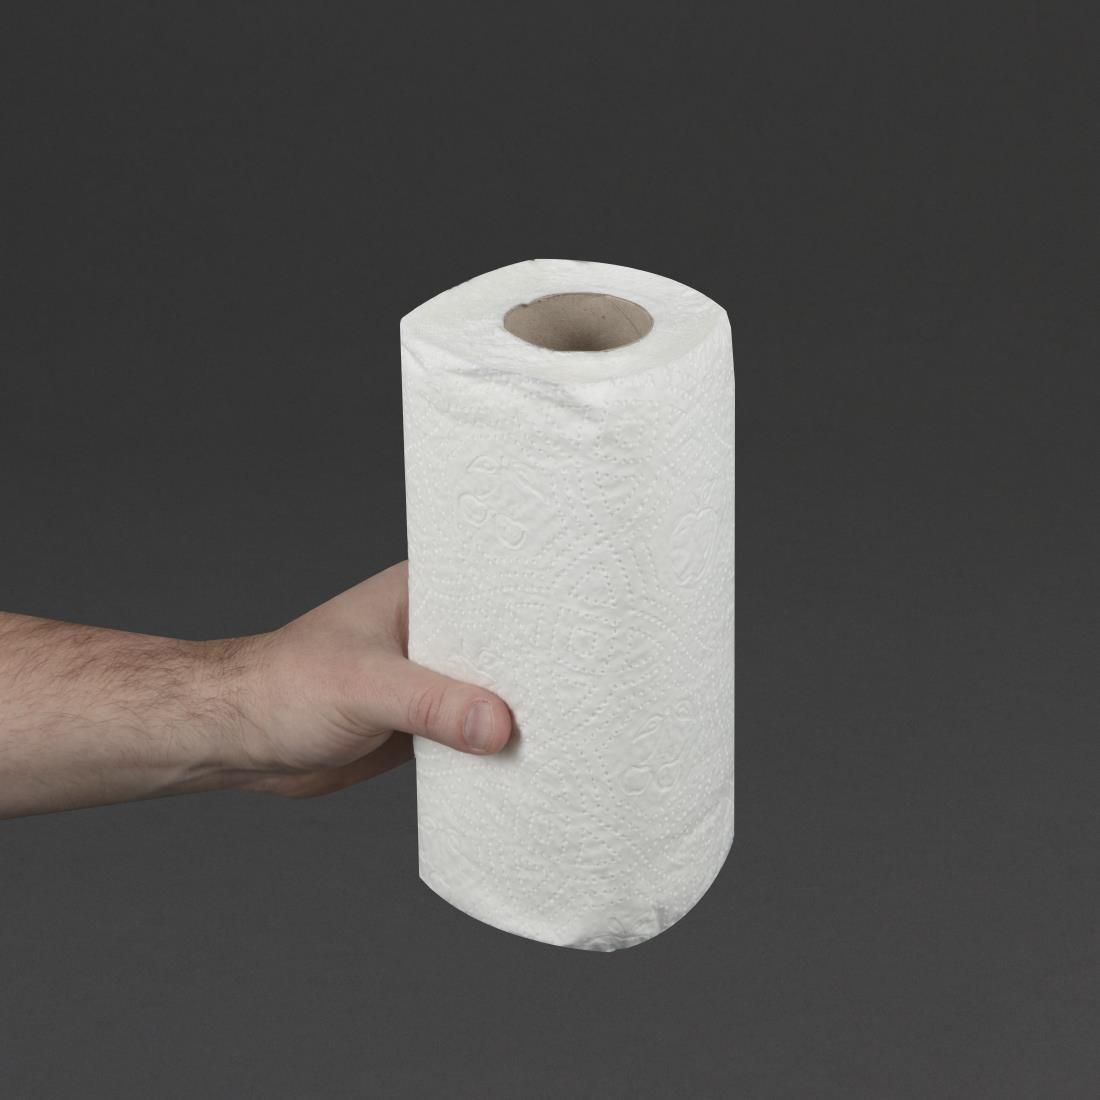 Jantex Kitchen Rolls White 2-Ply 11.5m (Pack of 24) - GH065  - 2